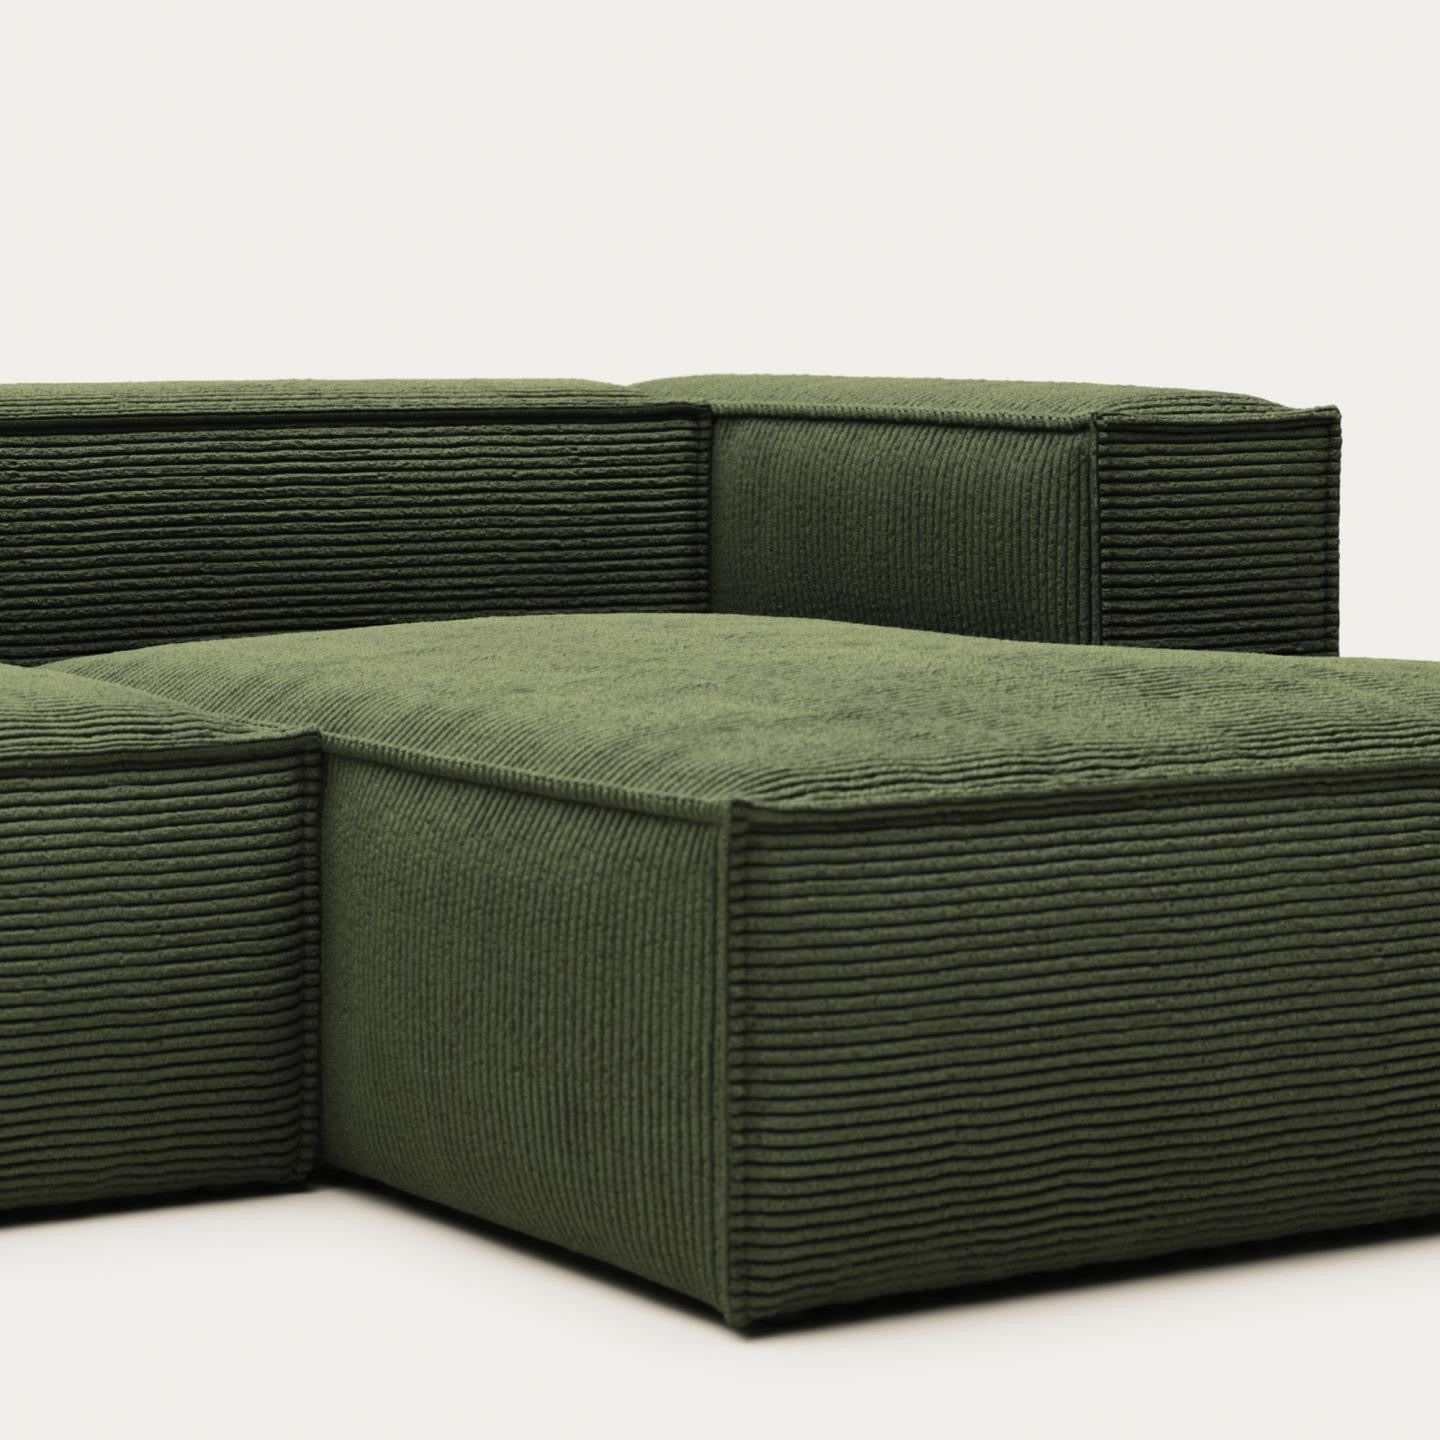 Lund 3 Seater Sofa with Right Side Chaise - Green Corduroy